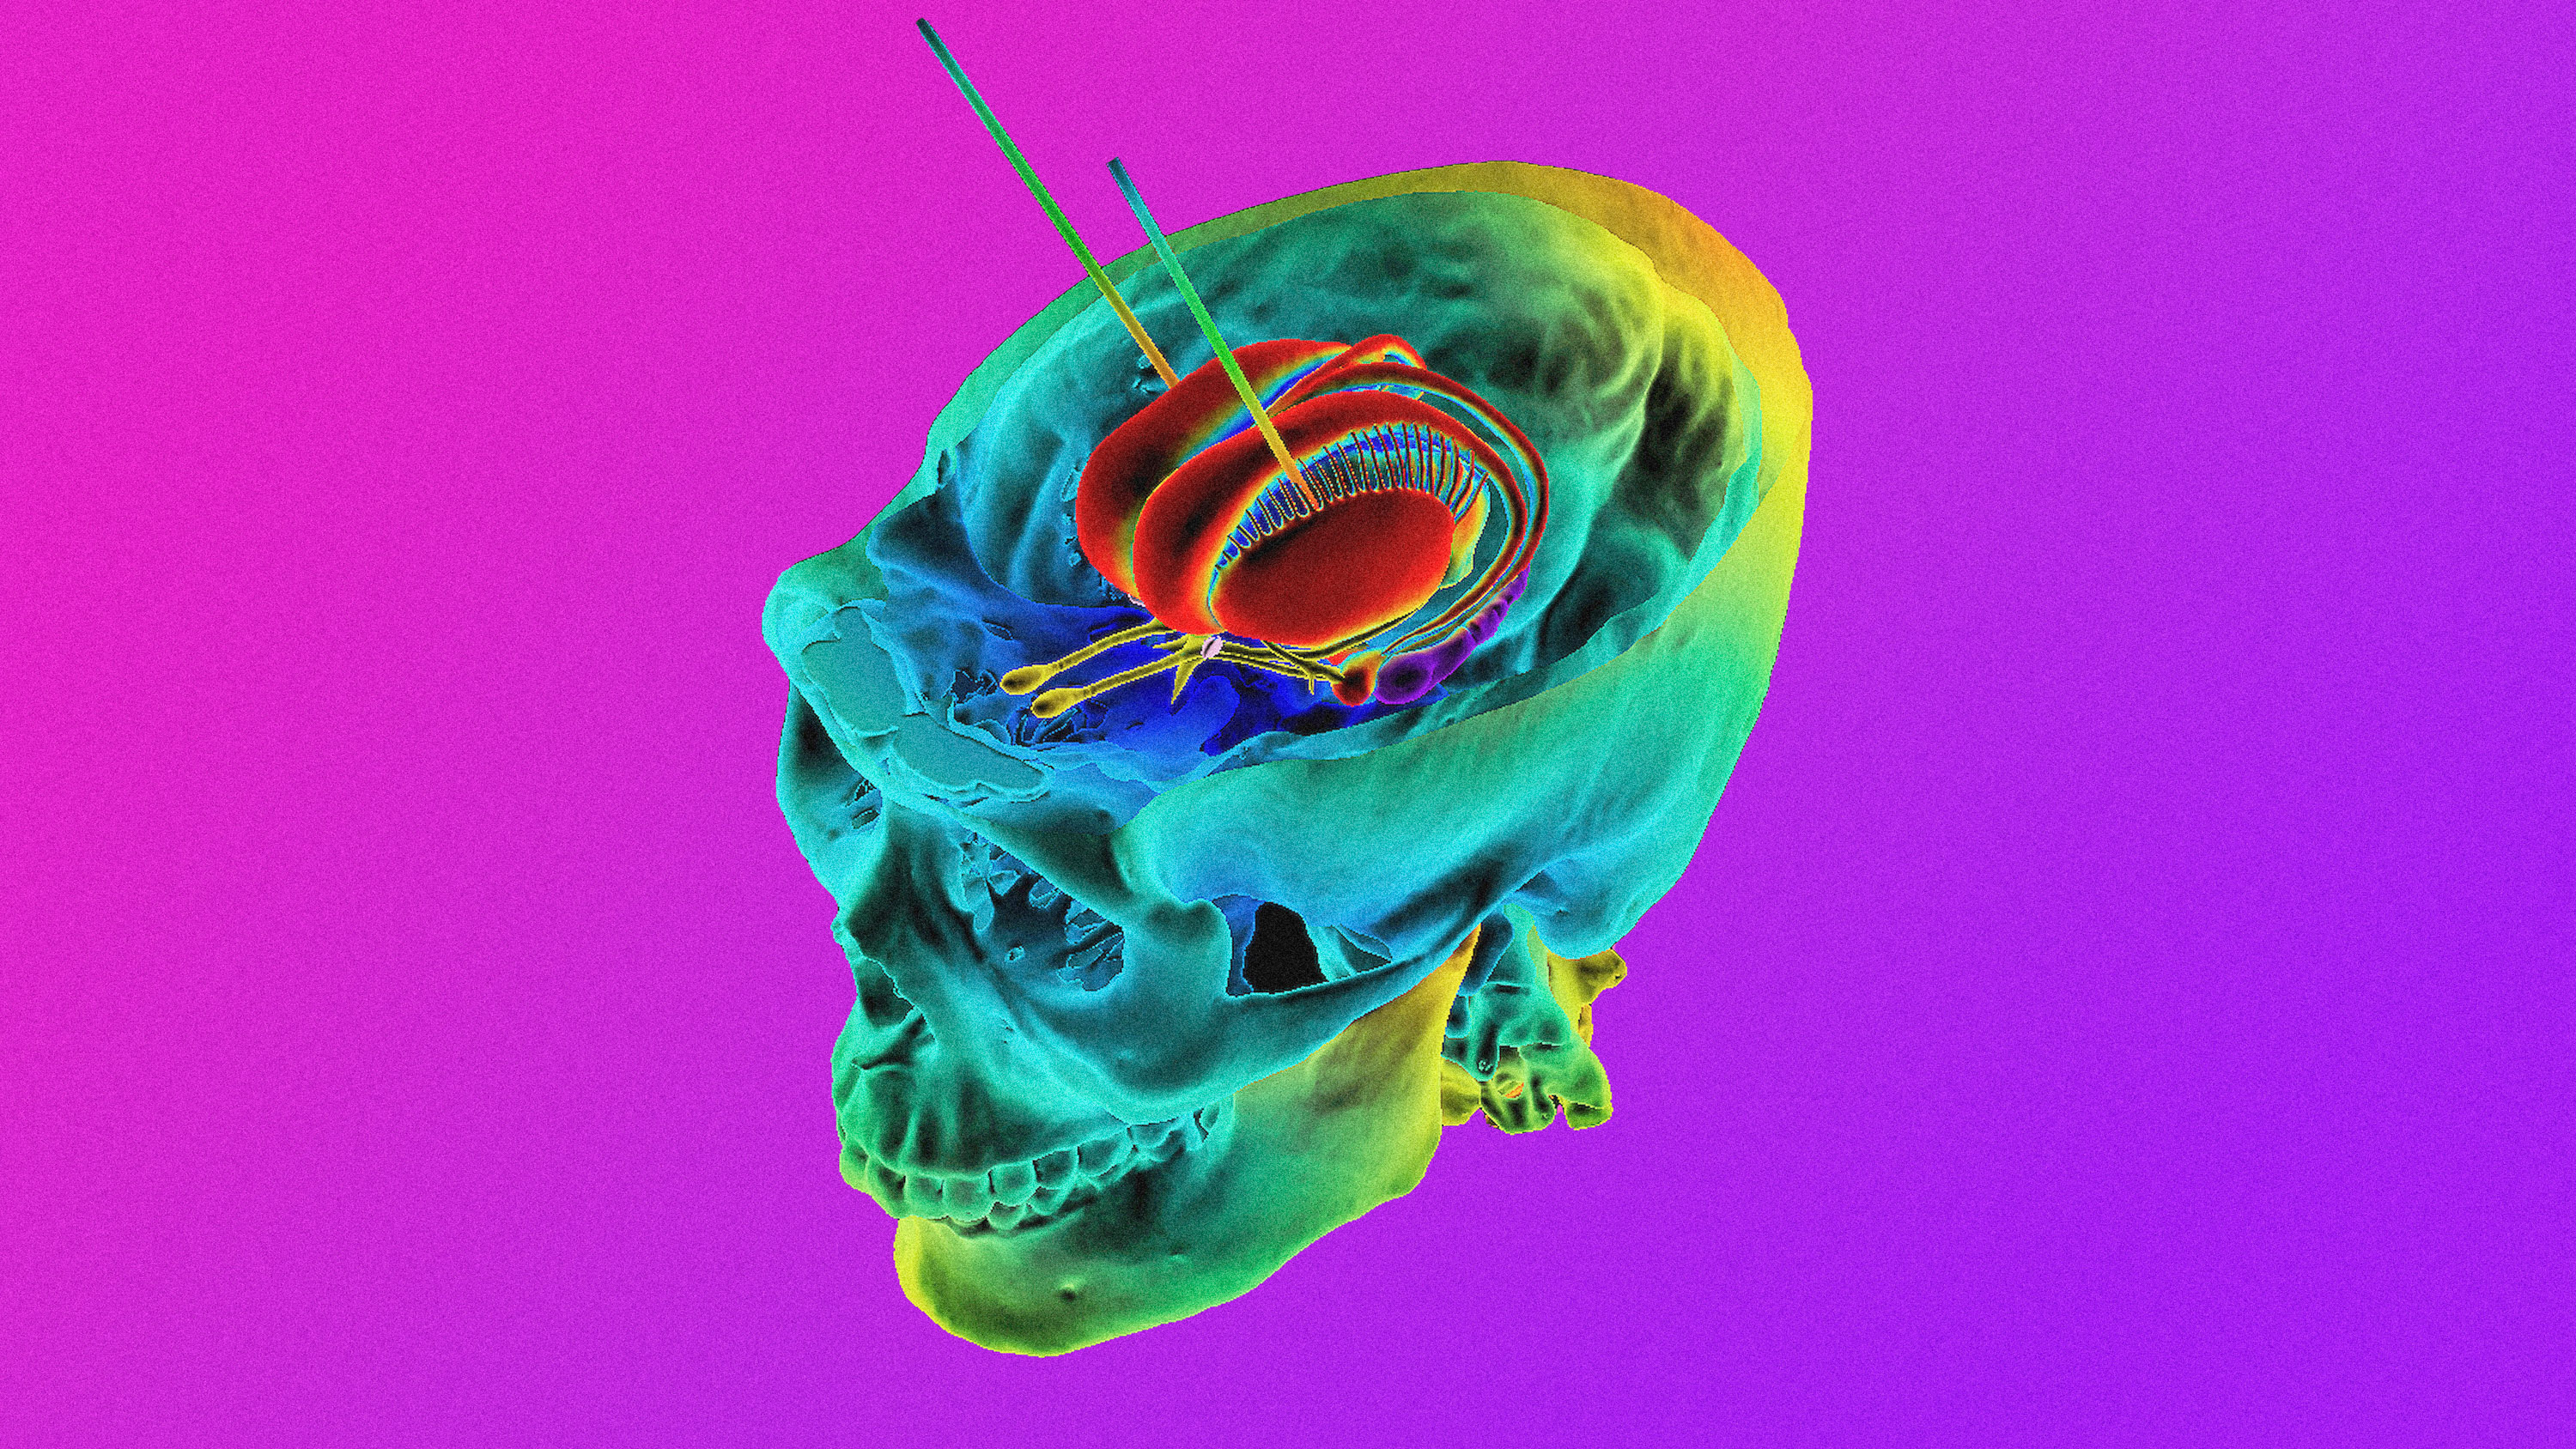 3D image based on computed tomography (CT) scans showing skull and the limbic system of the brain being stimulated by the neurosurgical treatment deep brain stimulation (DBS)